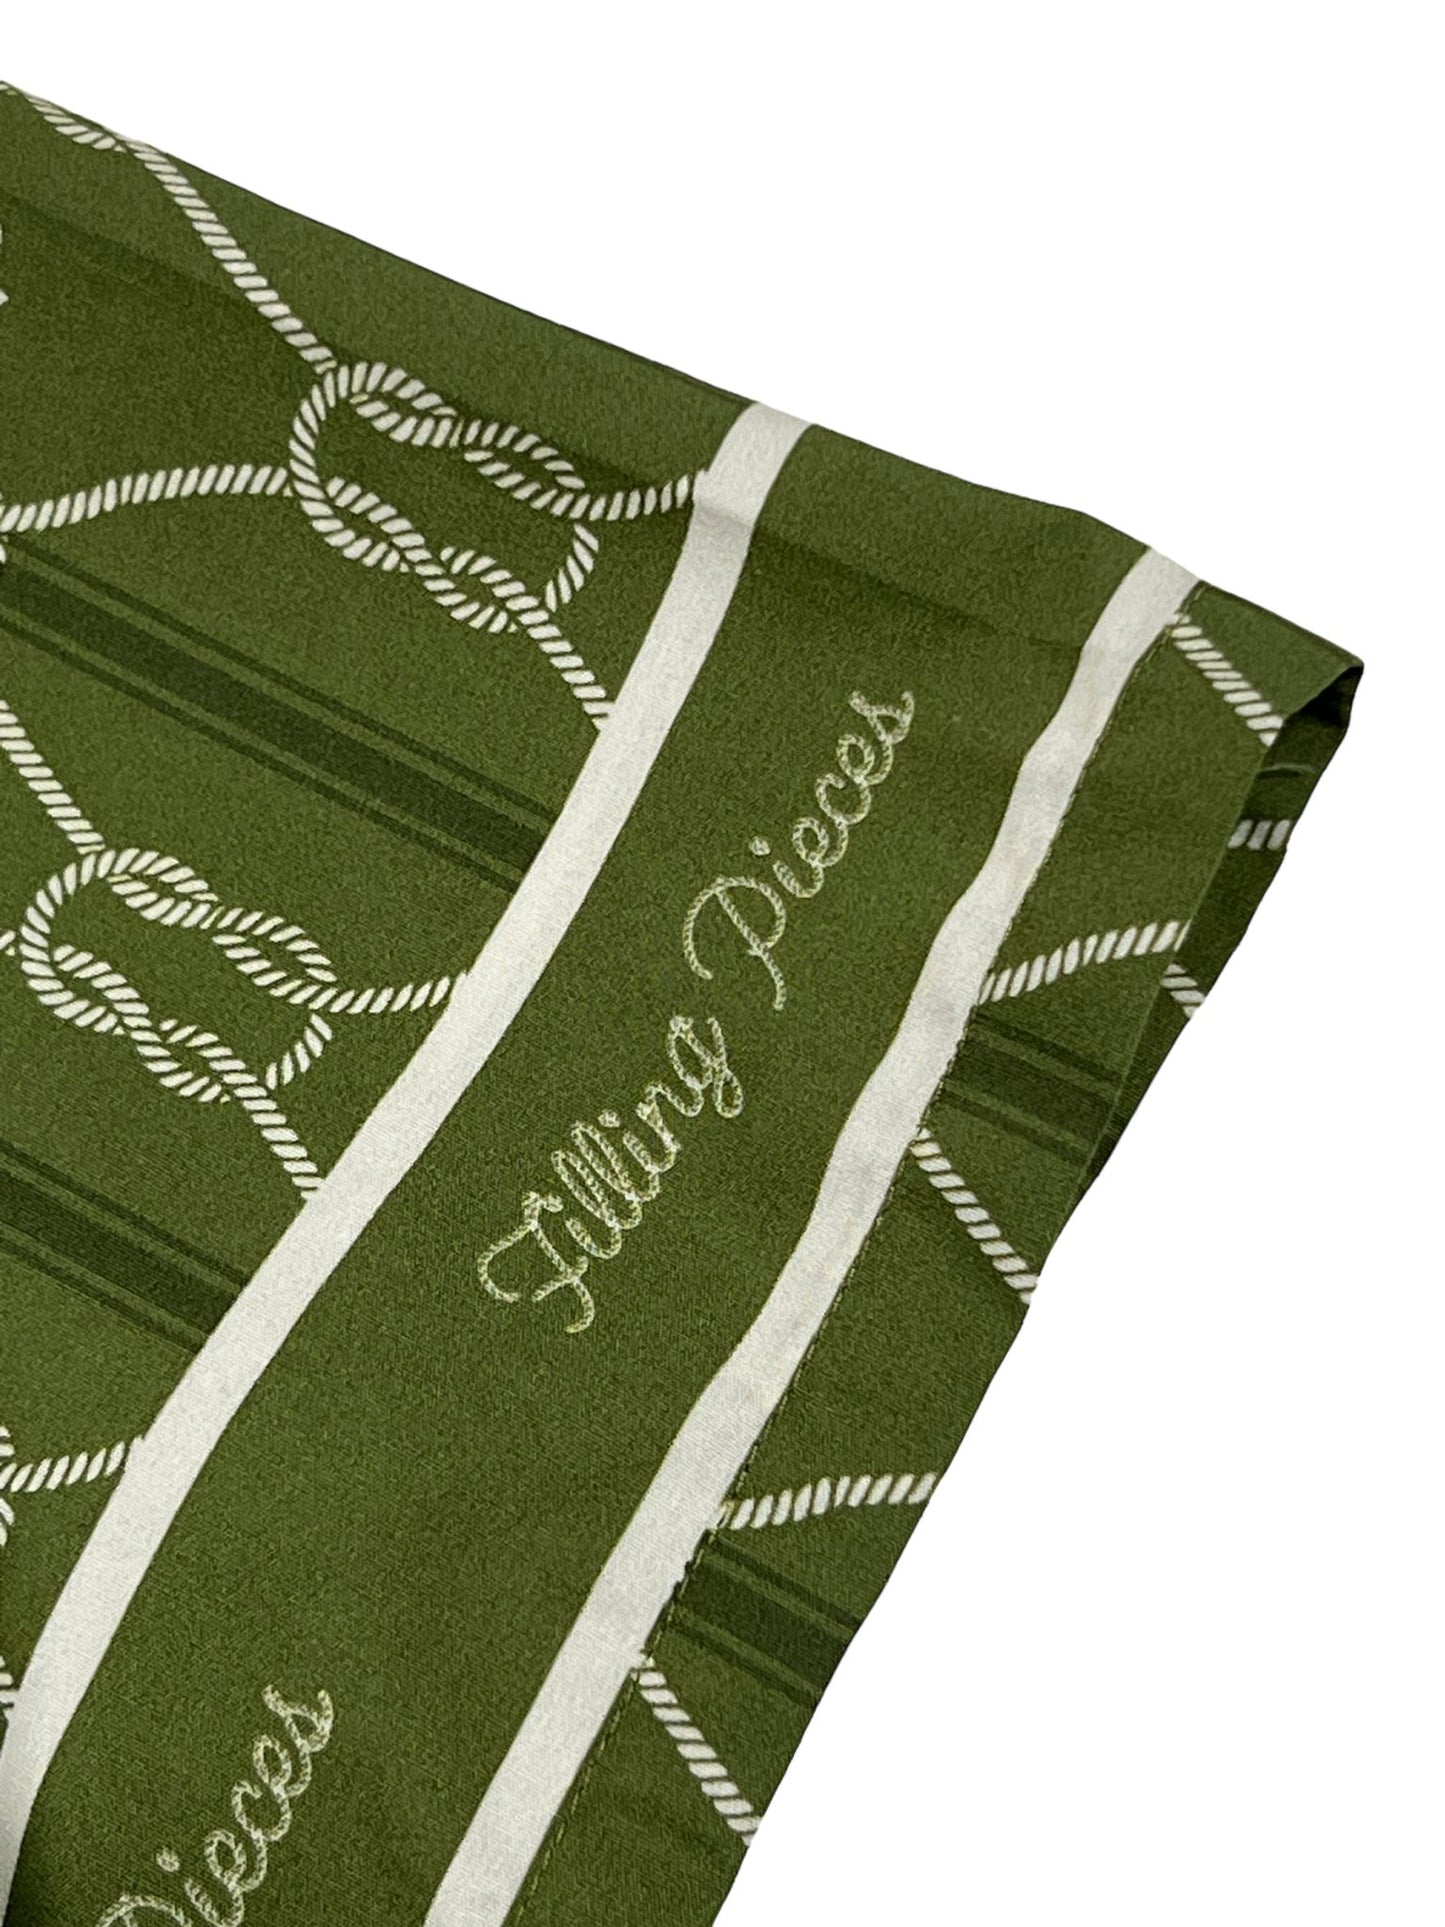 Green striped holiday-themed towel with candy cane motifs and FILLING PIECES RESORT MONOGRAM SHIRT OLIVE text embroidery by FILLING PIECES.